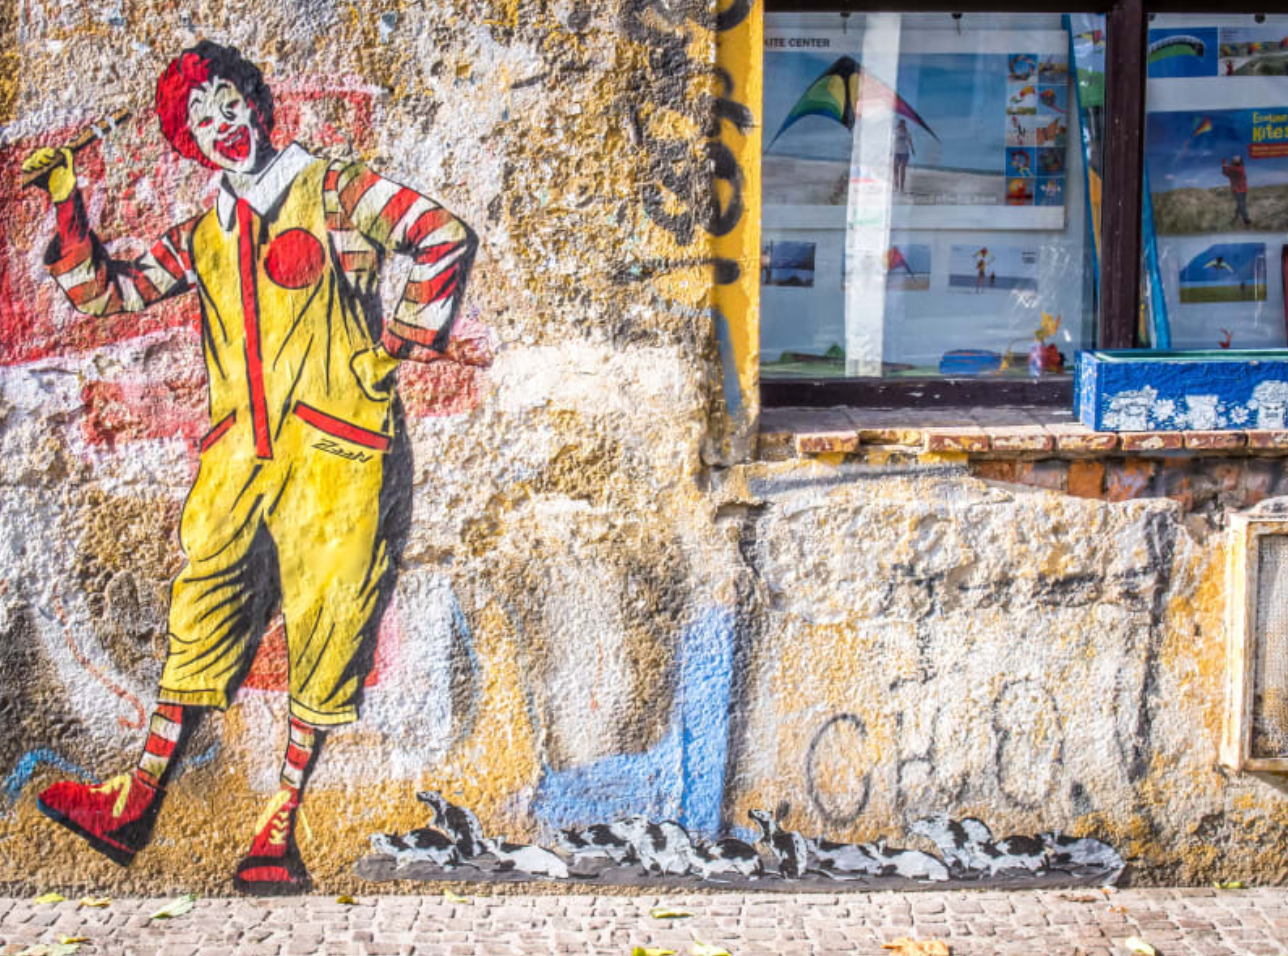 Ronald McDonald How to think about capitalism and climate change